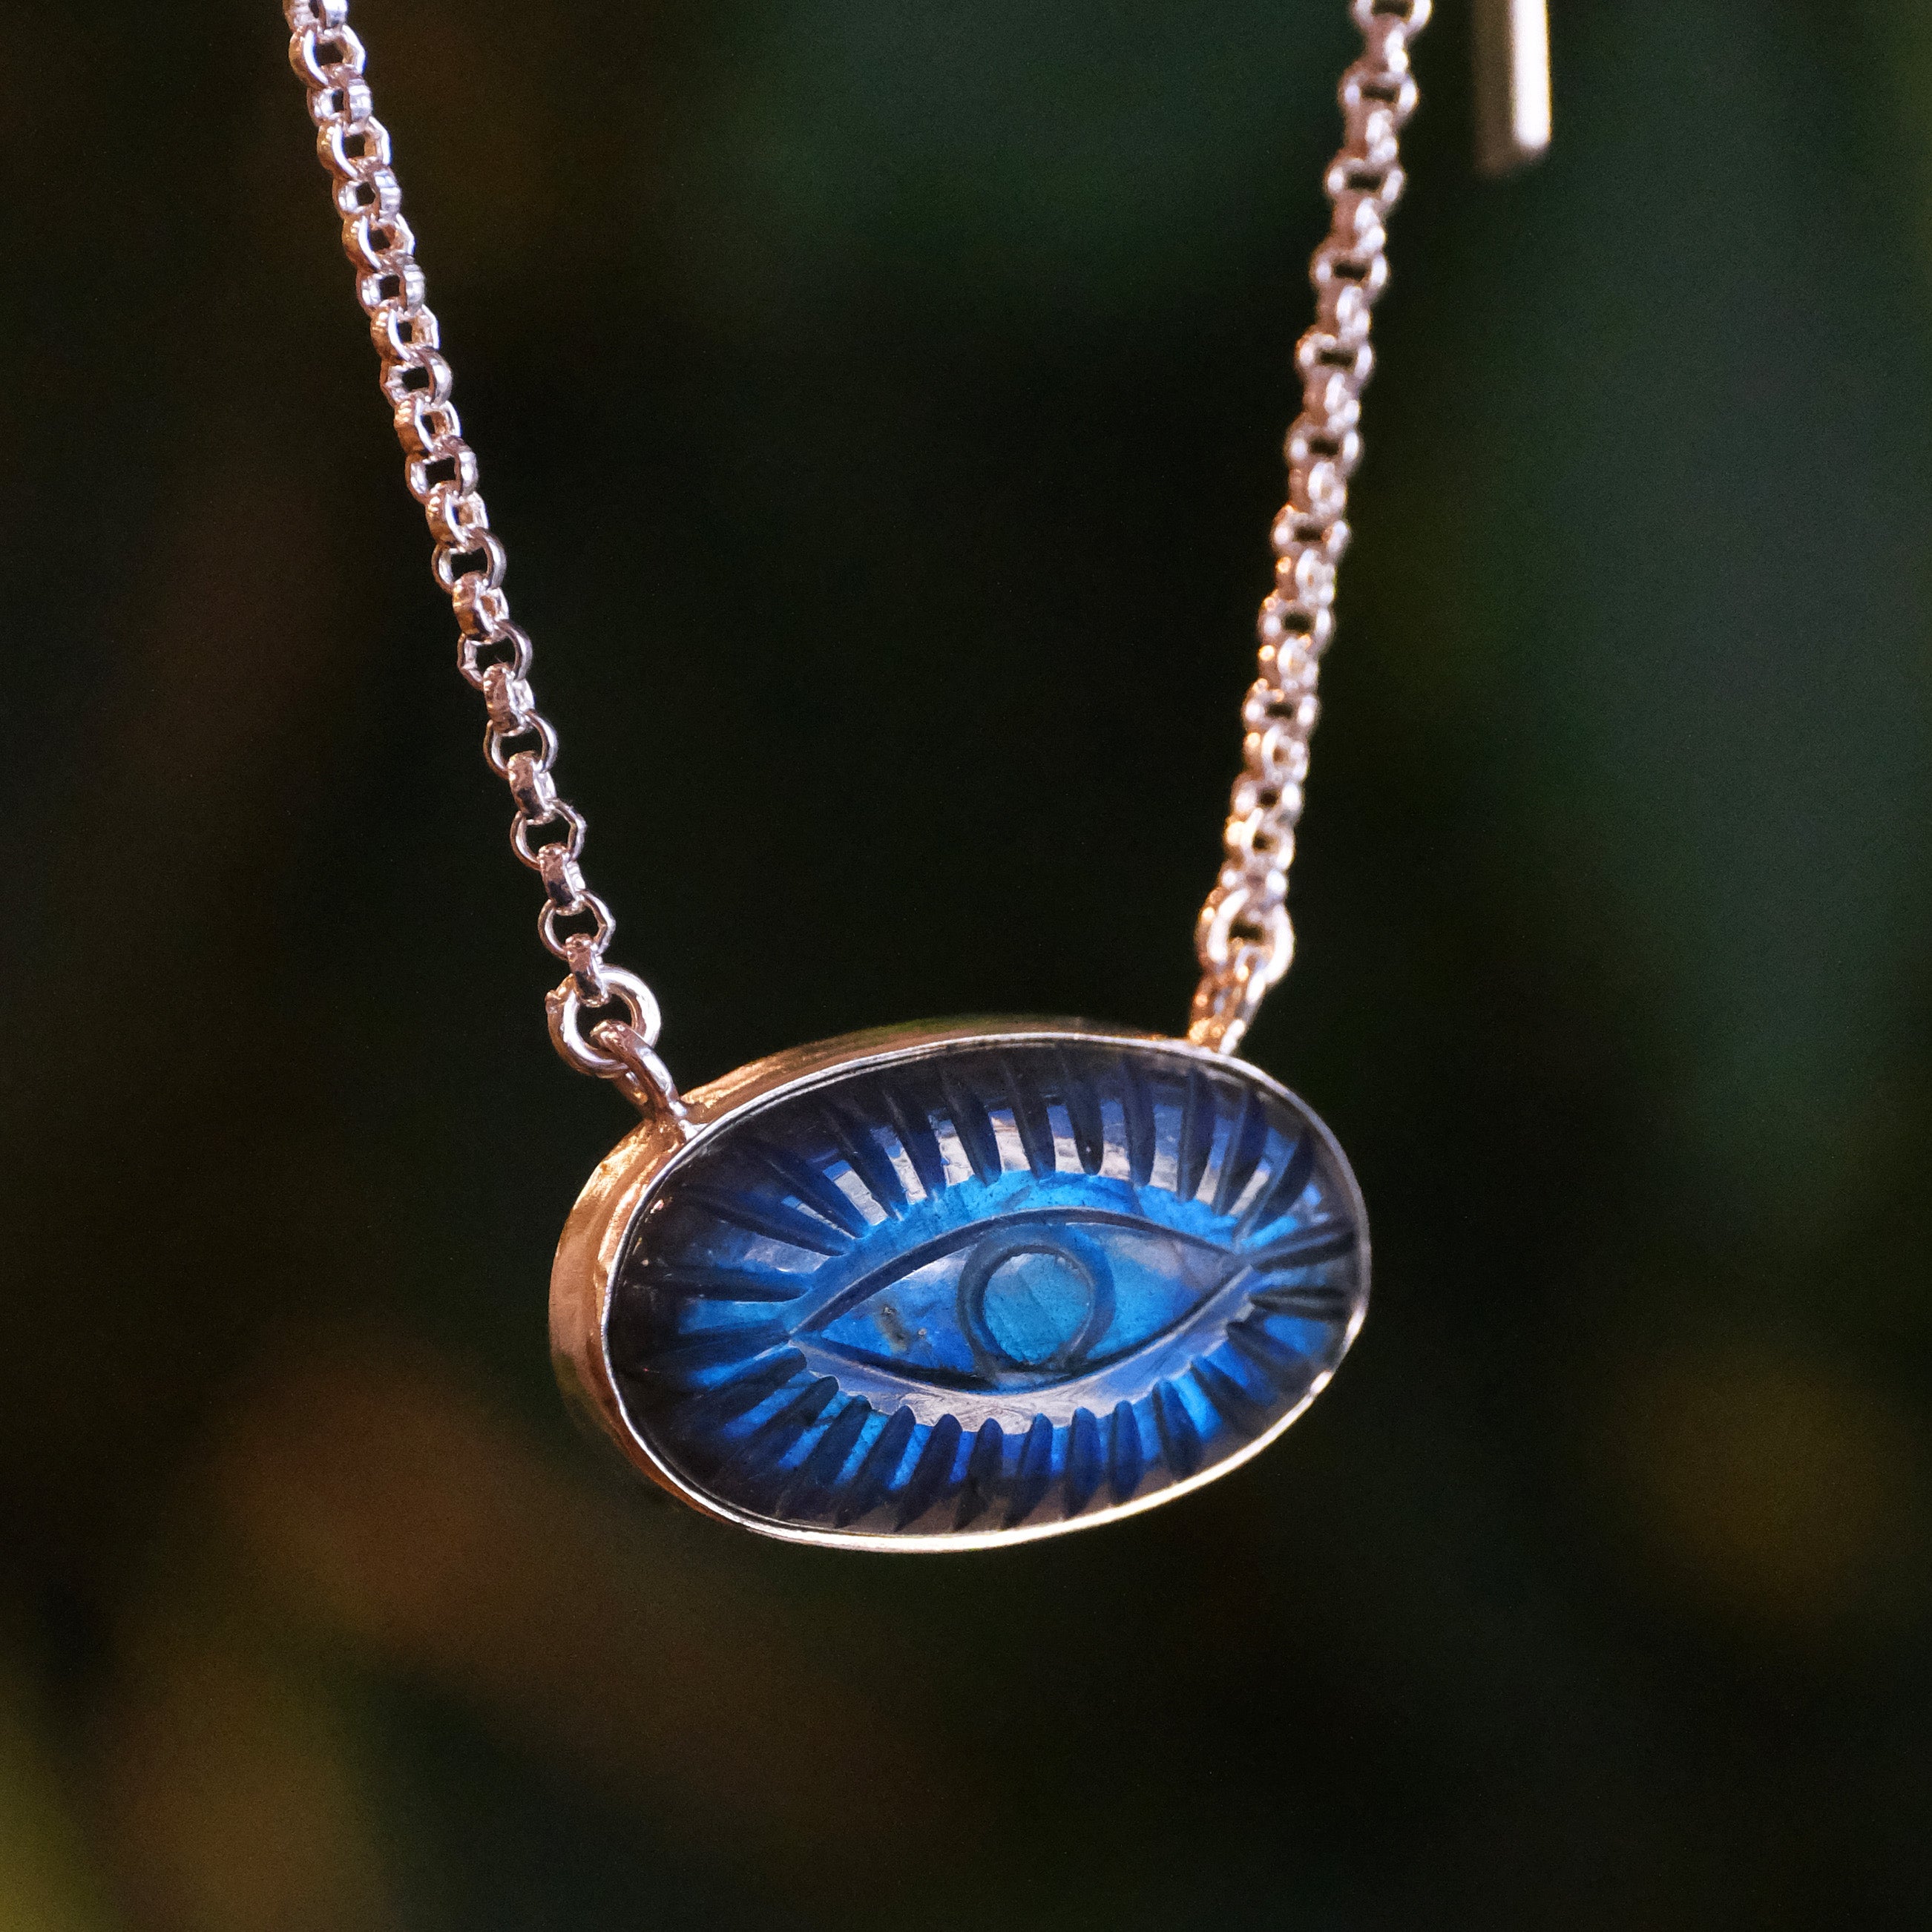 Labradorite Evil Eye Protector Necklace - One of a Kind